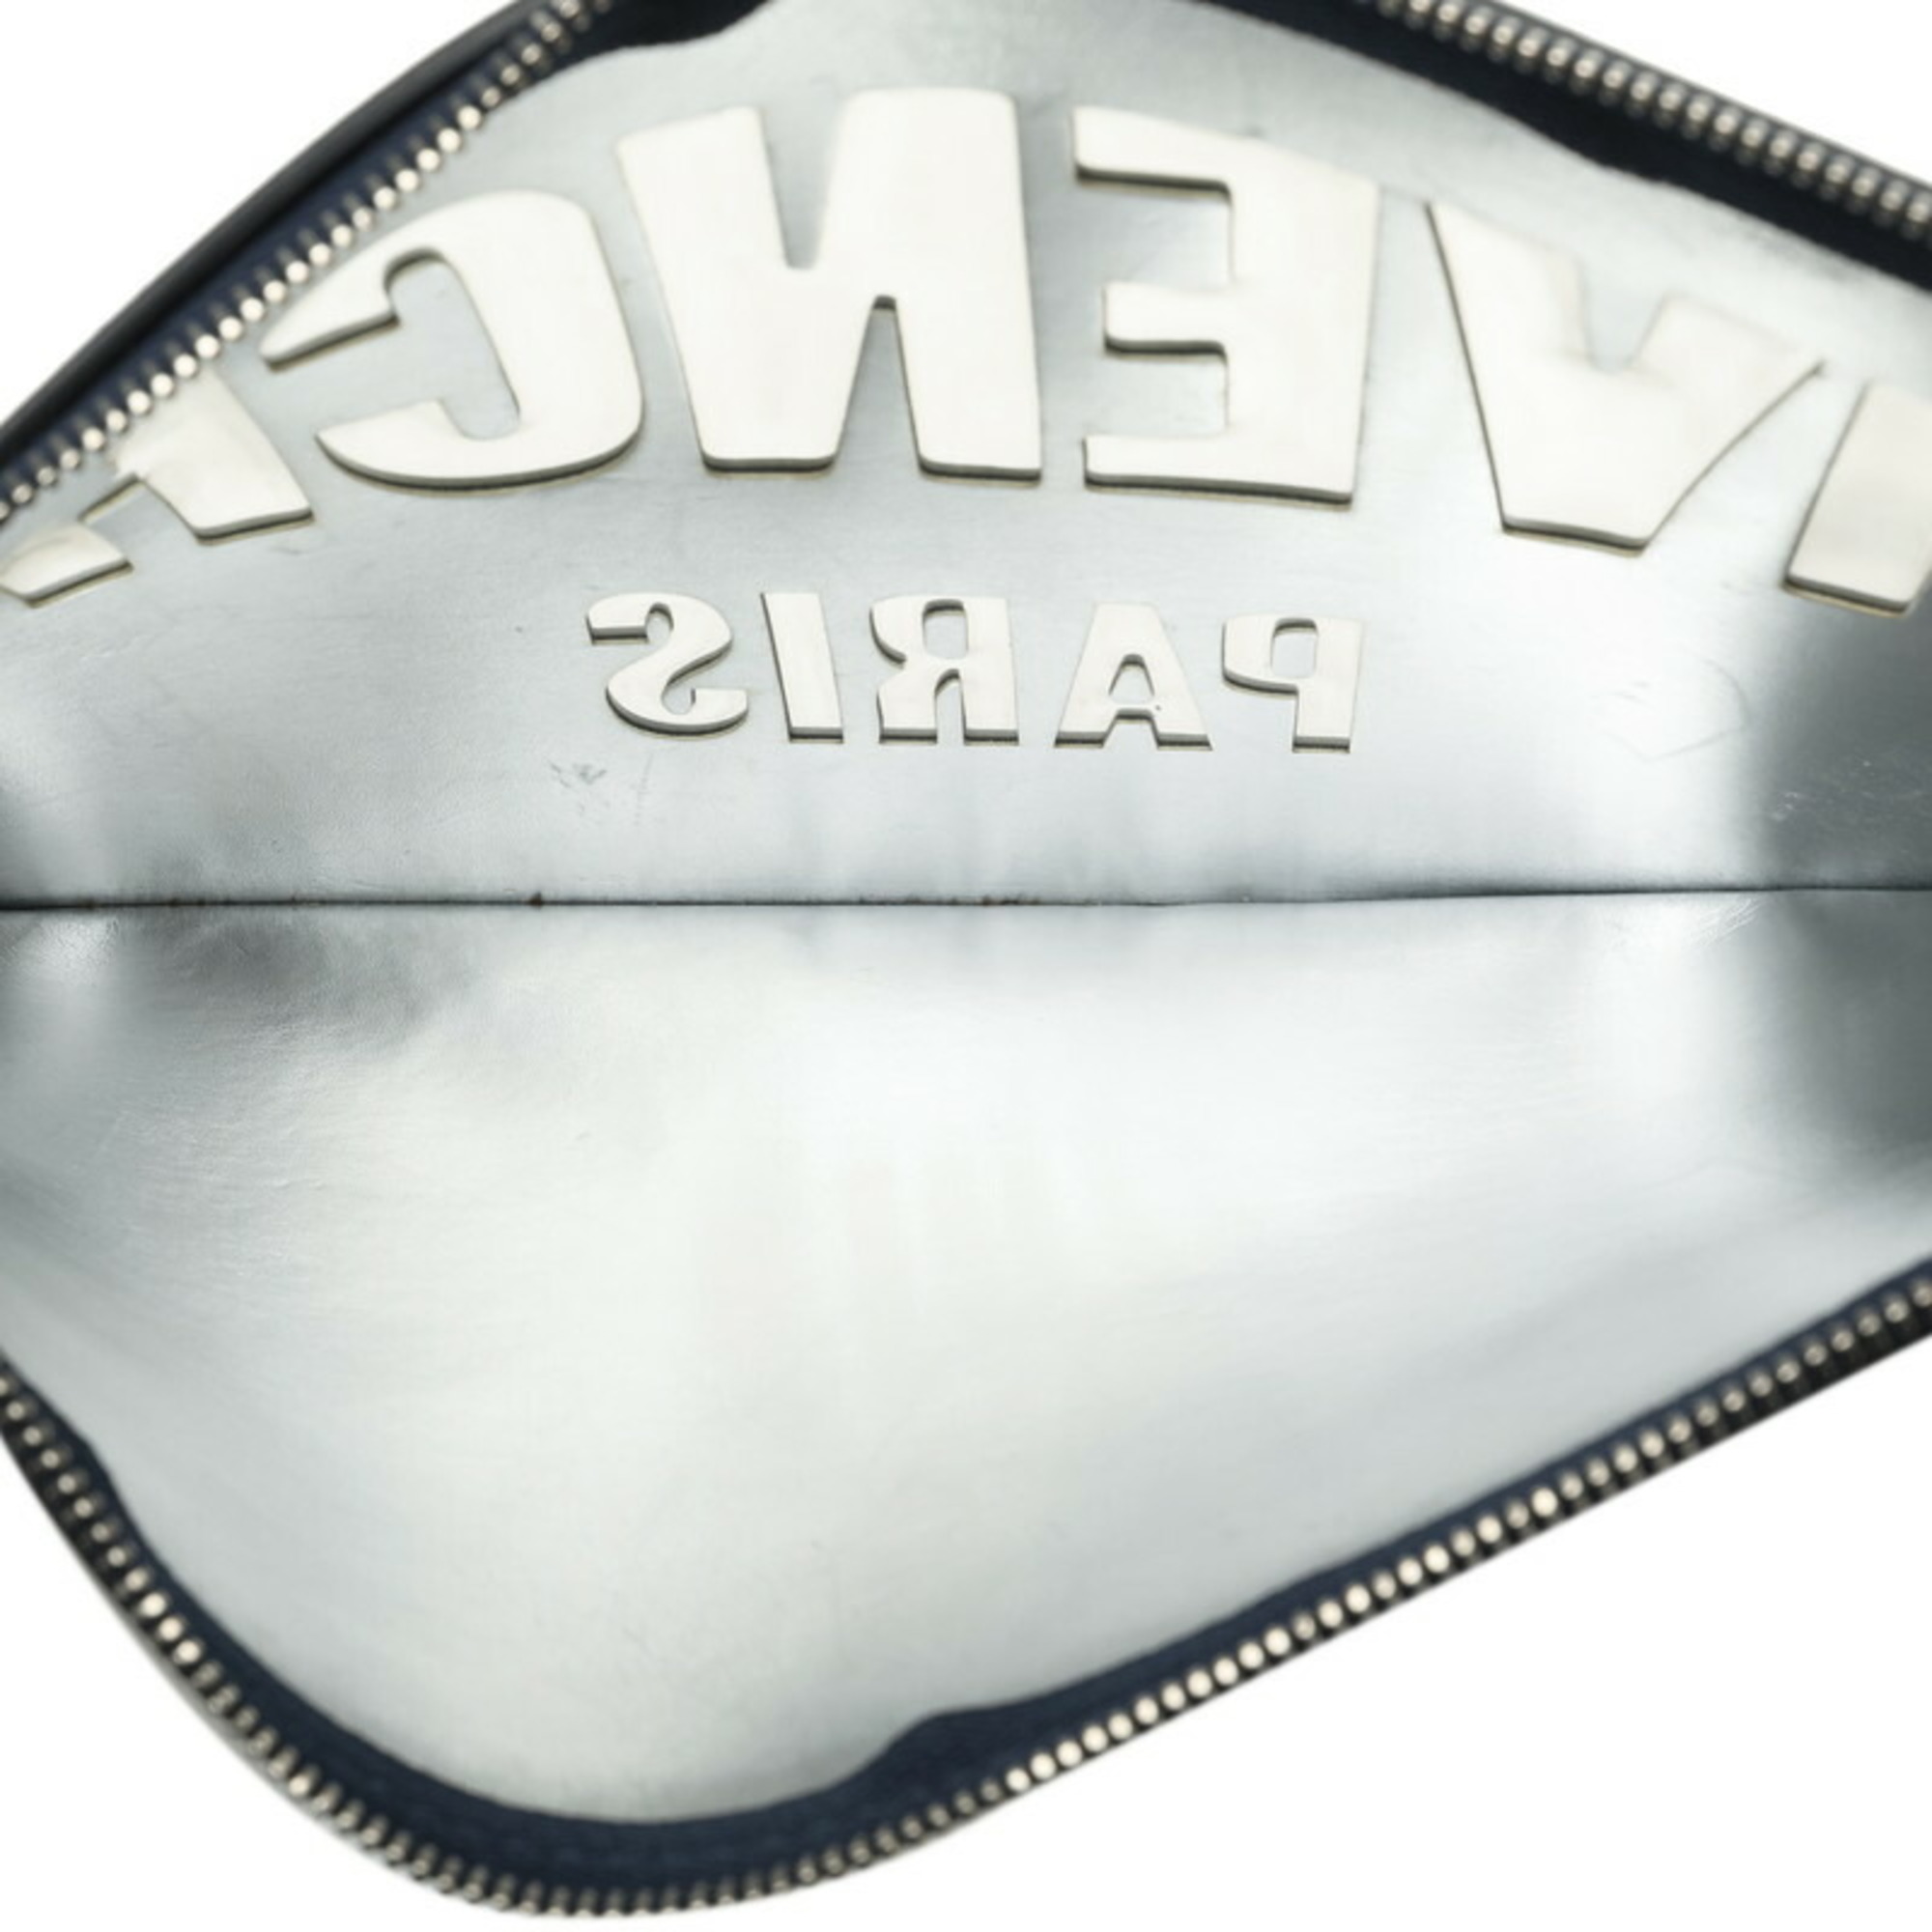 Givenchy Plate Iconic Clutch Bag Second Blue Silver Leather Women's